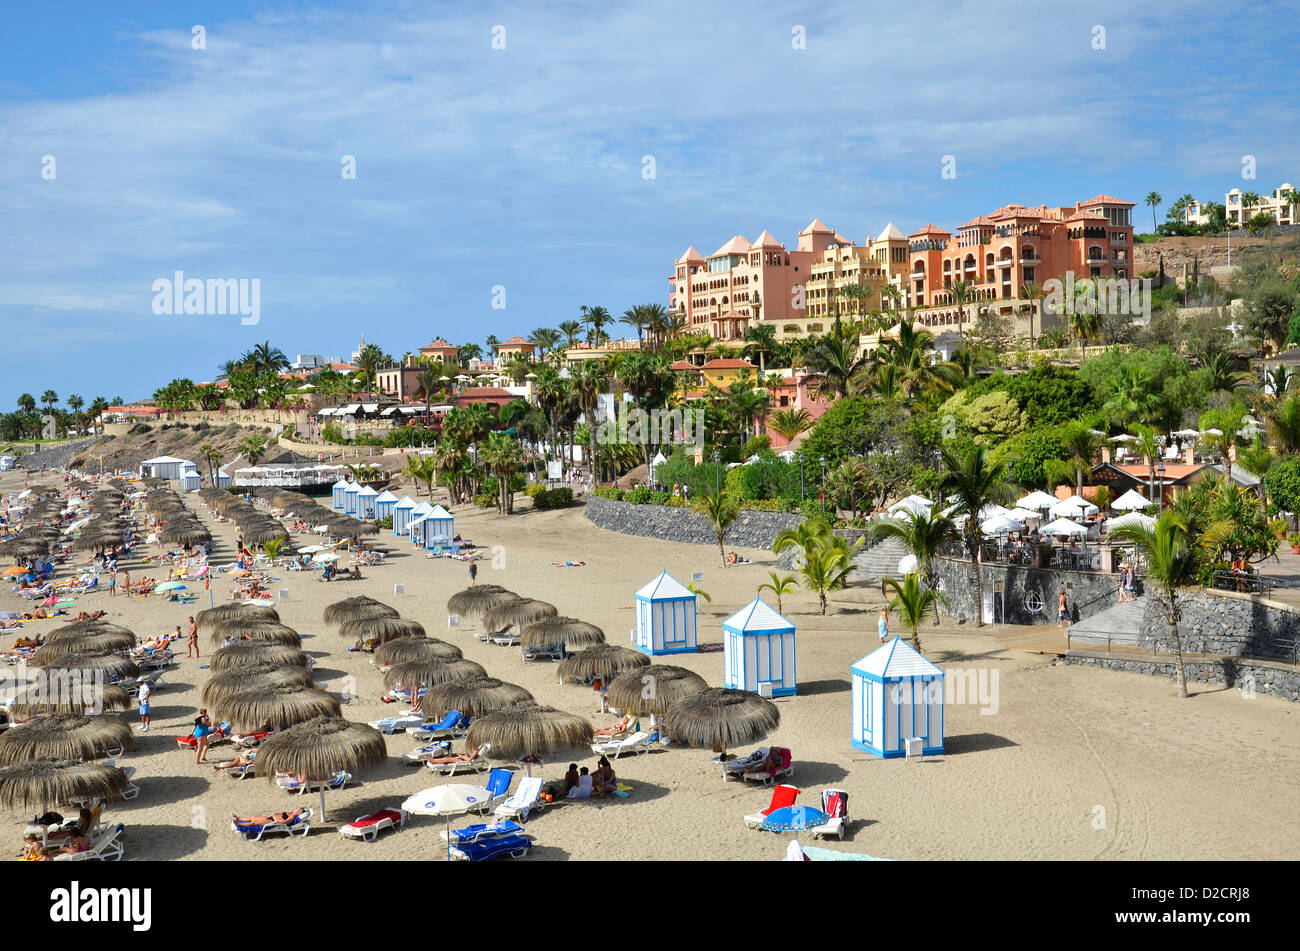 The beach at Bahia Del Duque on the Costa Adeje, Tenerife, Canary Islands Stock Photo